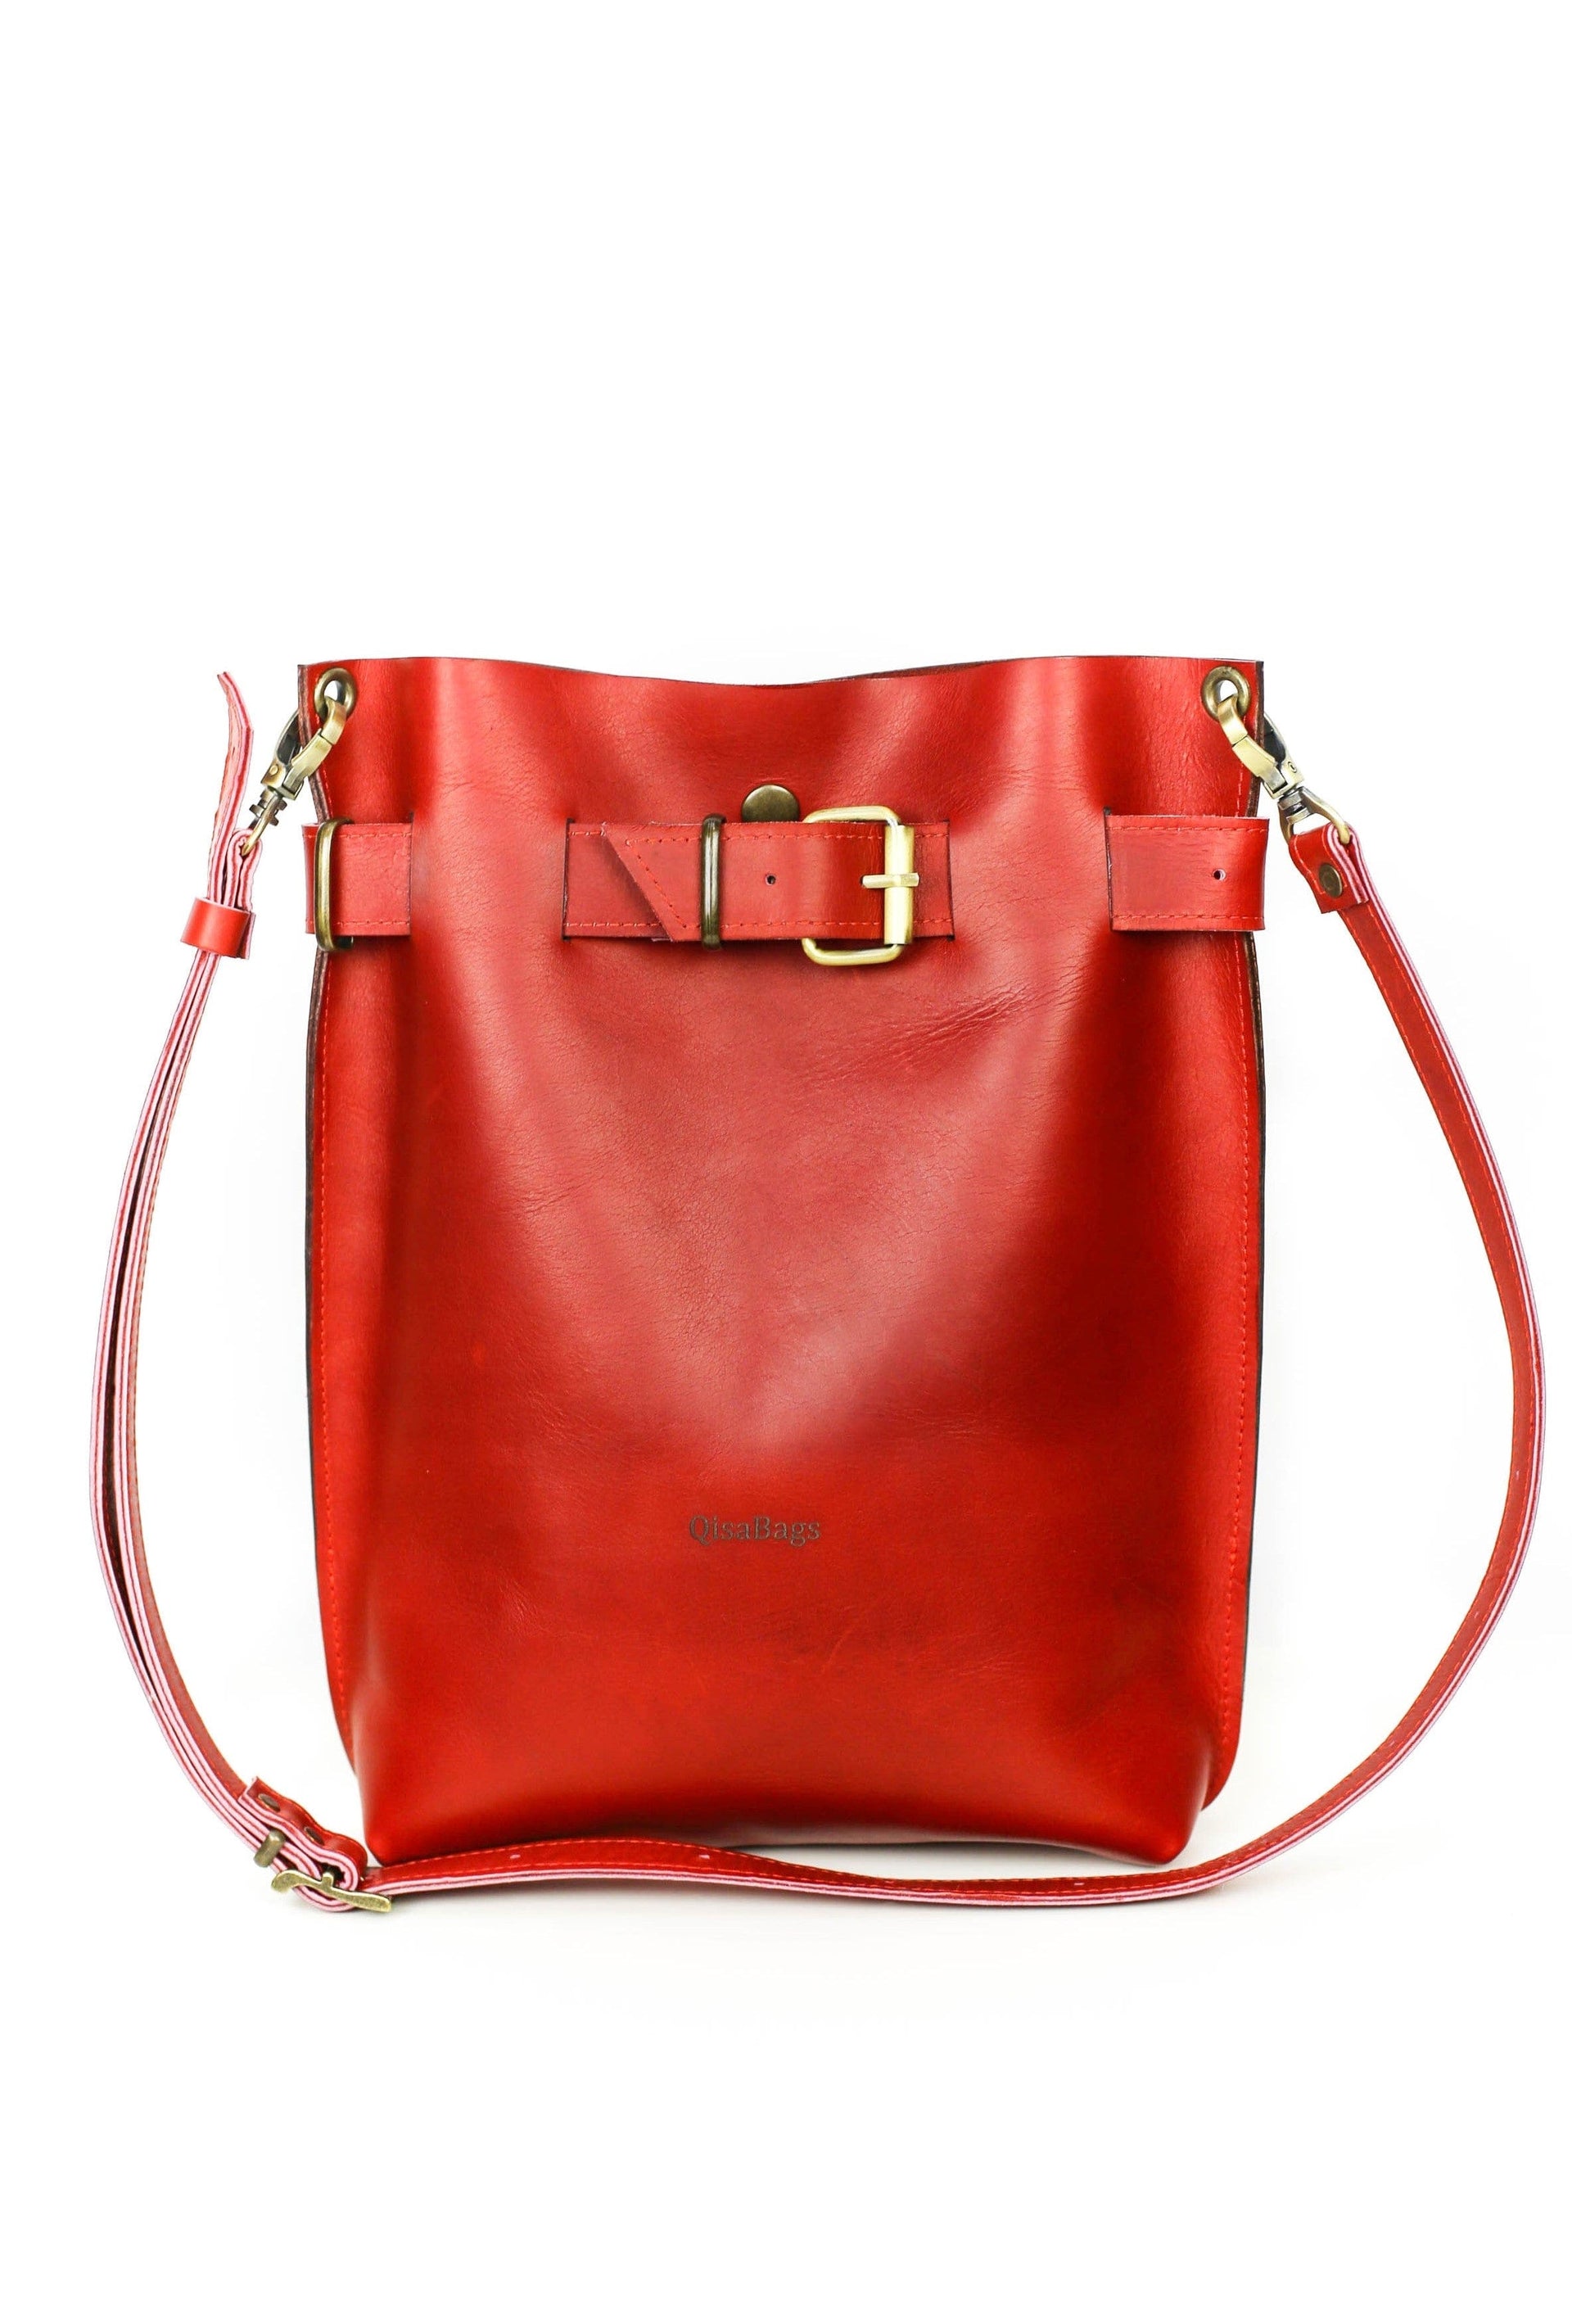 Red Leather Backpack, Red Leather Crossbody Bag